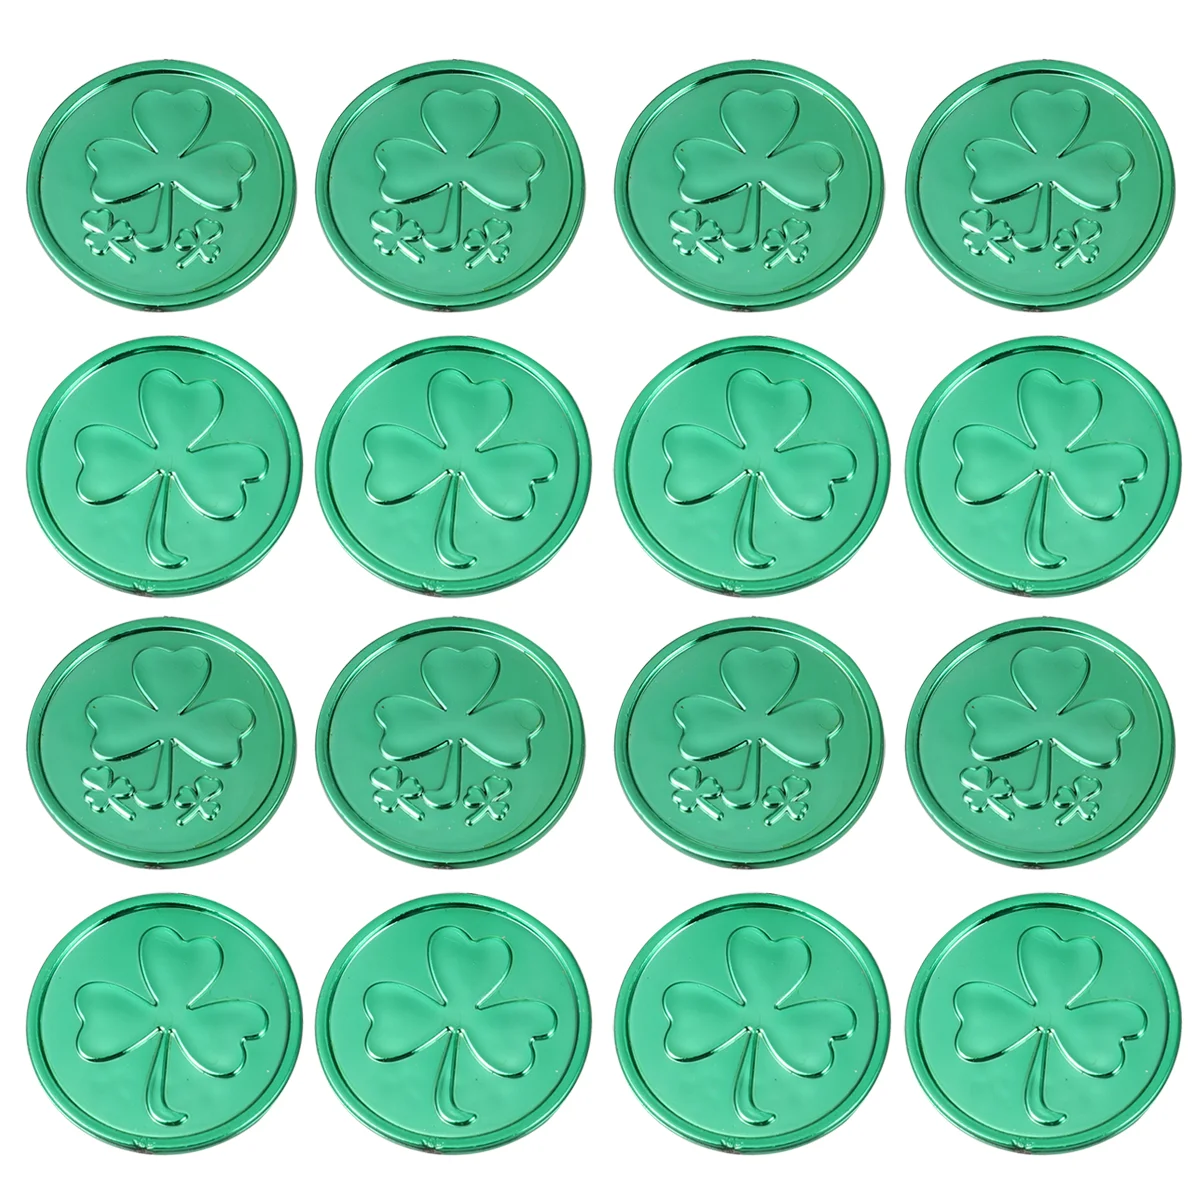 

Coins Toys Patrick Party Pirate Shamrock S Day Coin Supplies St Green Treasure Gold Decorations Favors Plastic Leprechaun Leaf